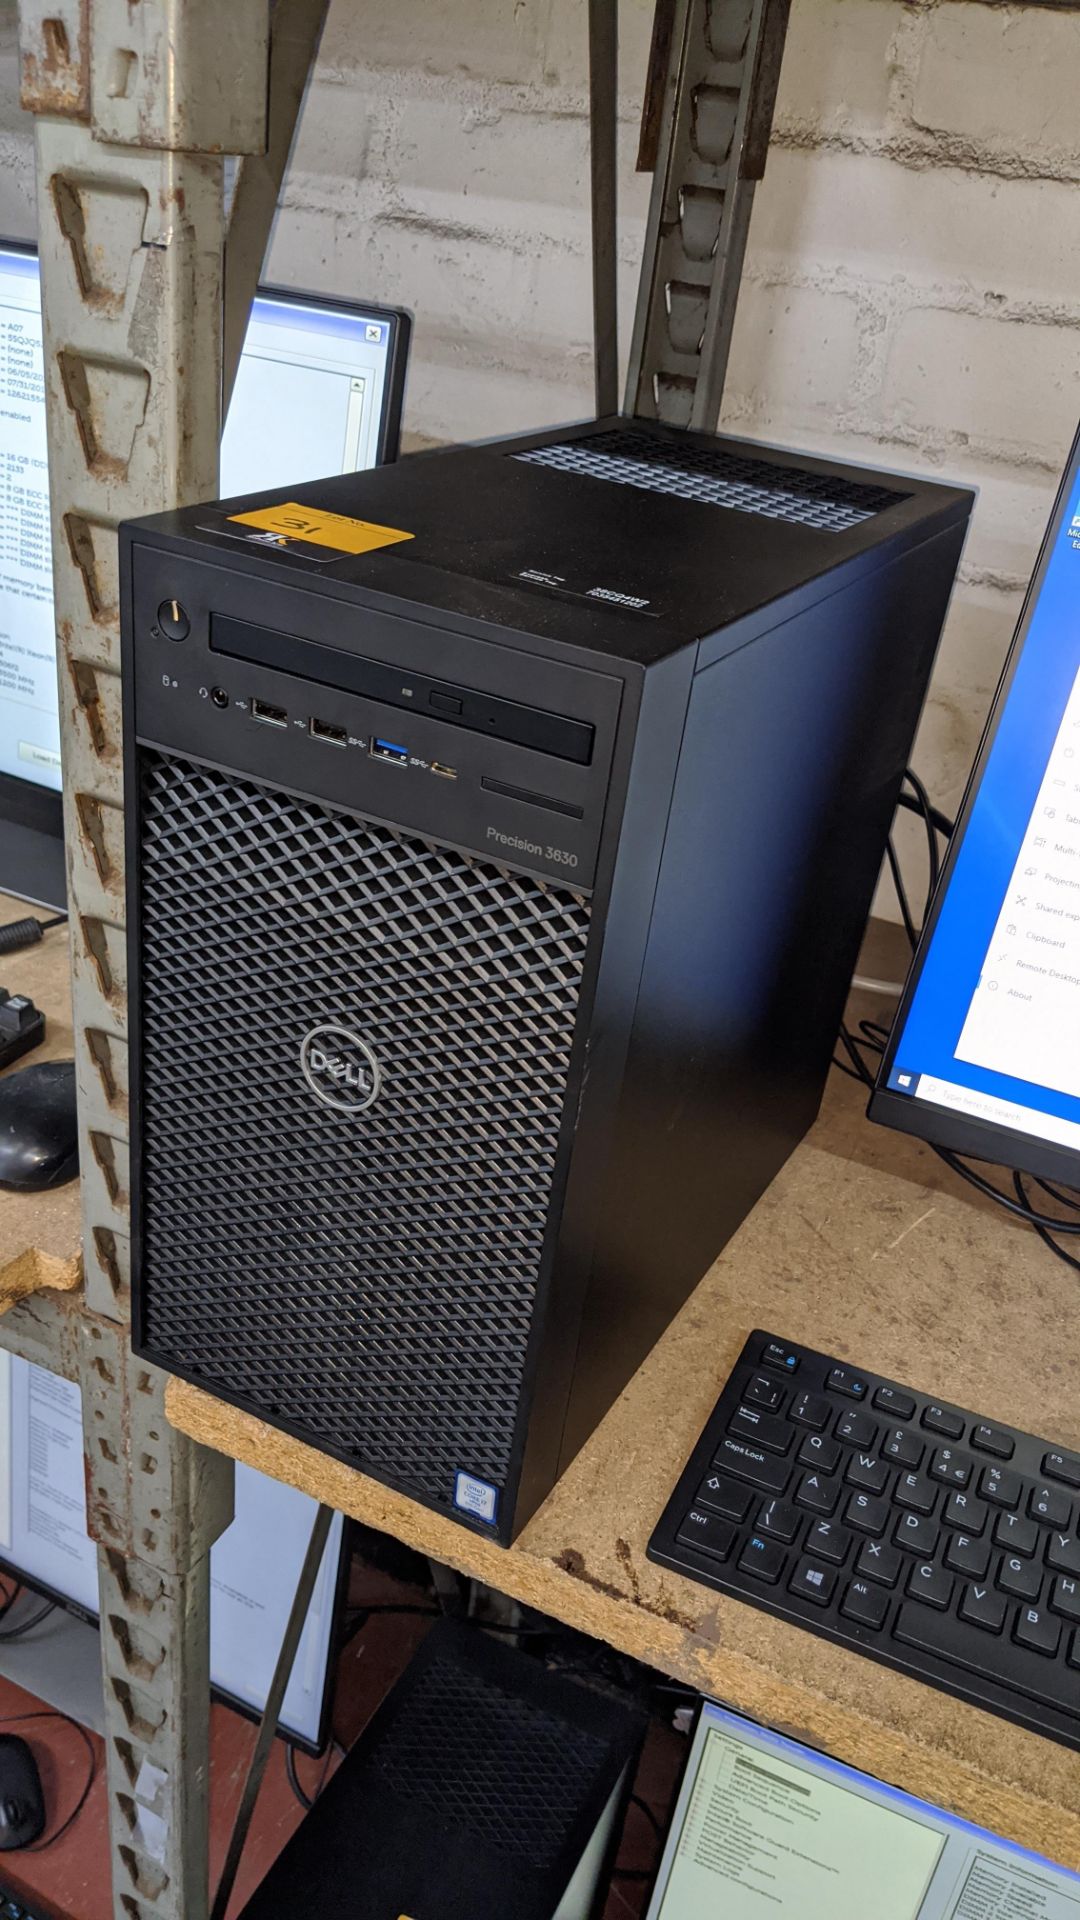 Dell Precision tower 3630 computer with Intel Core i7-8700 processor, 8Gb RAM, 256Gb SSD etc. includ - Image 3 of 5